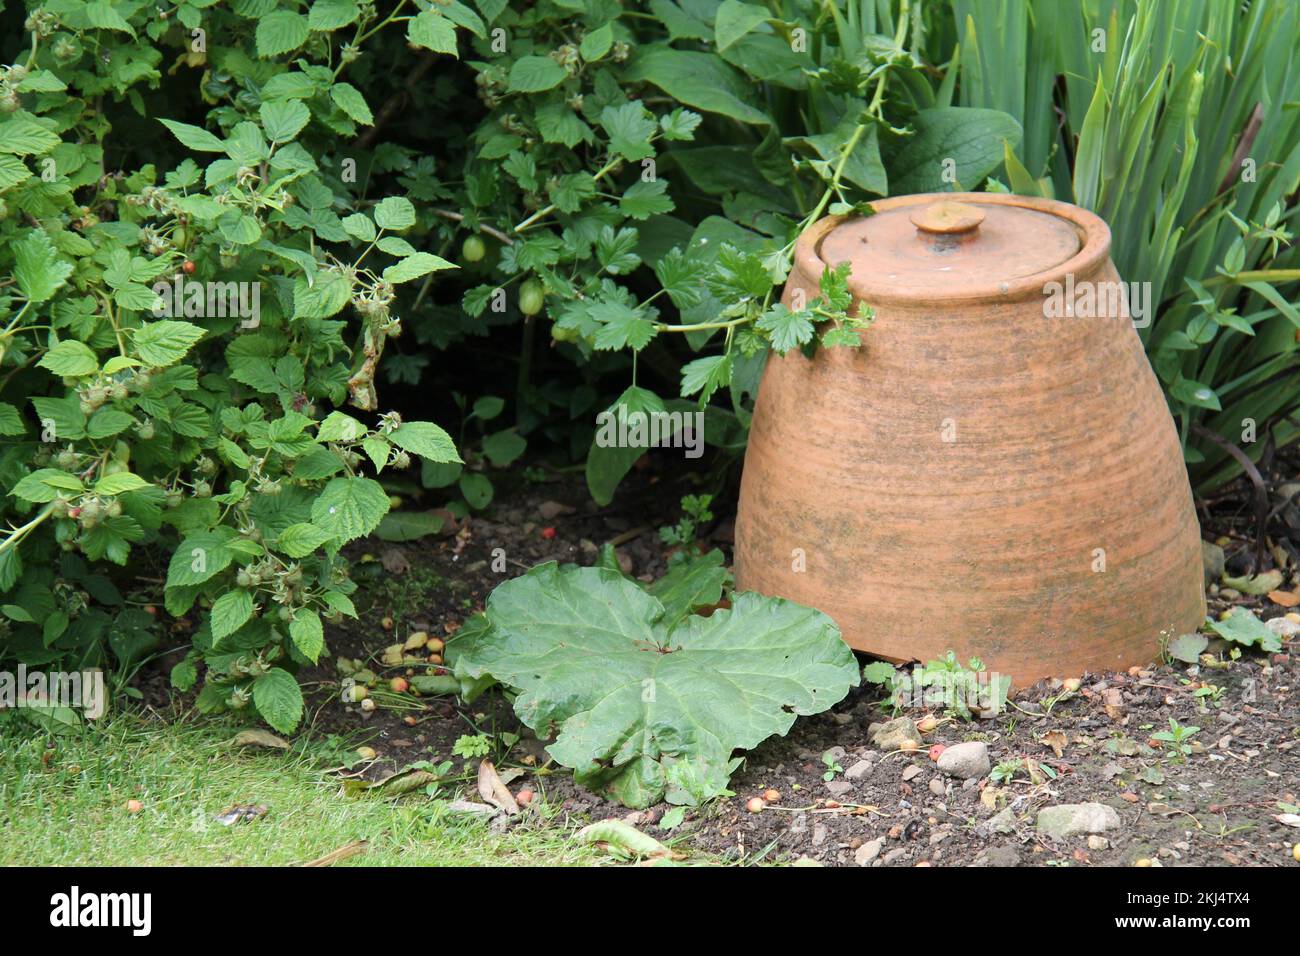 A Terracotta Forcing Pot for Growing a Rhubarb Plant. Stock Photo